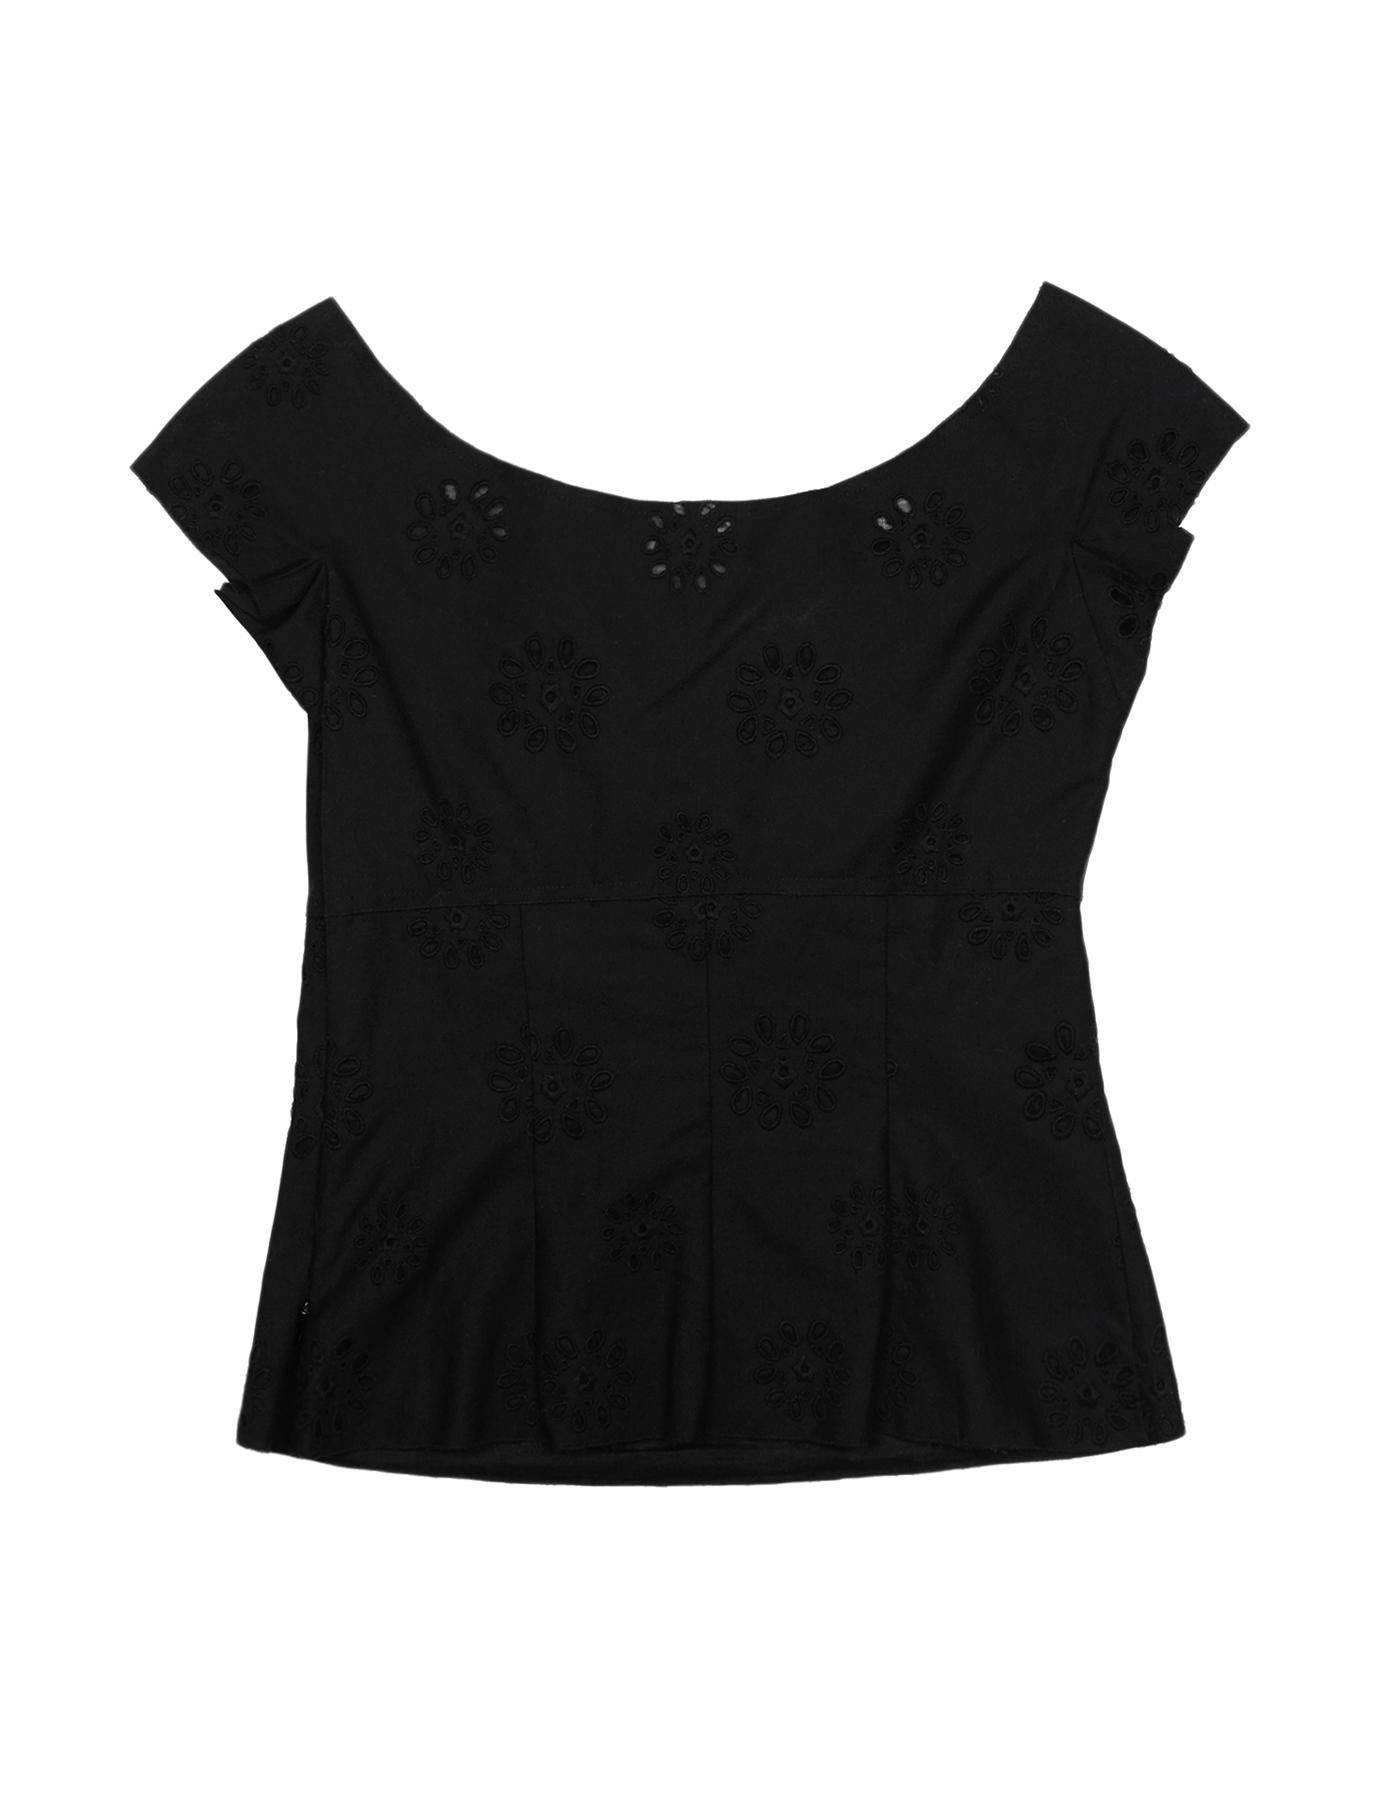 Prada Black Cotton Eyelet Cap Sleeve Top Sz 38

Made In: Italy
Color: Black
Hardware: Black
Materials: 100% cotton
Closure/Opening: Hidden side zipper
Overall Condition: Excellent pre-owned condition 

Measurements: 
Bust: 28